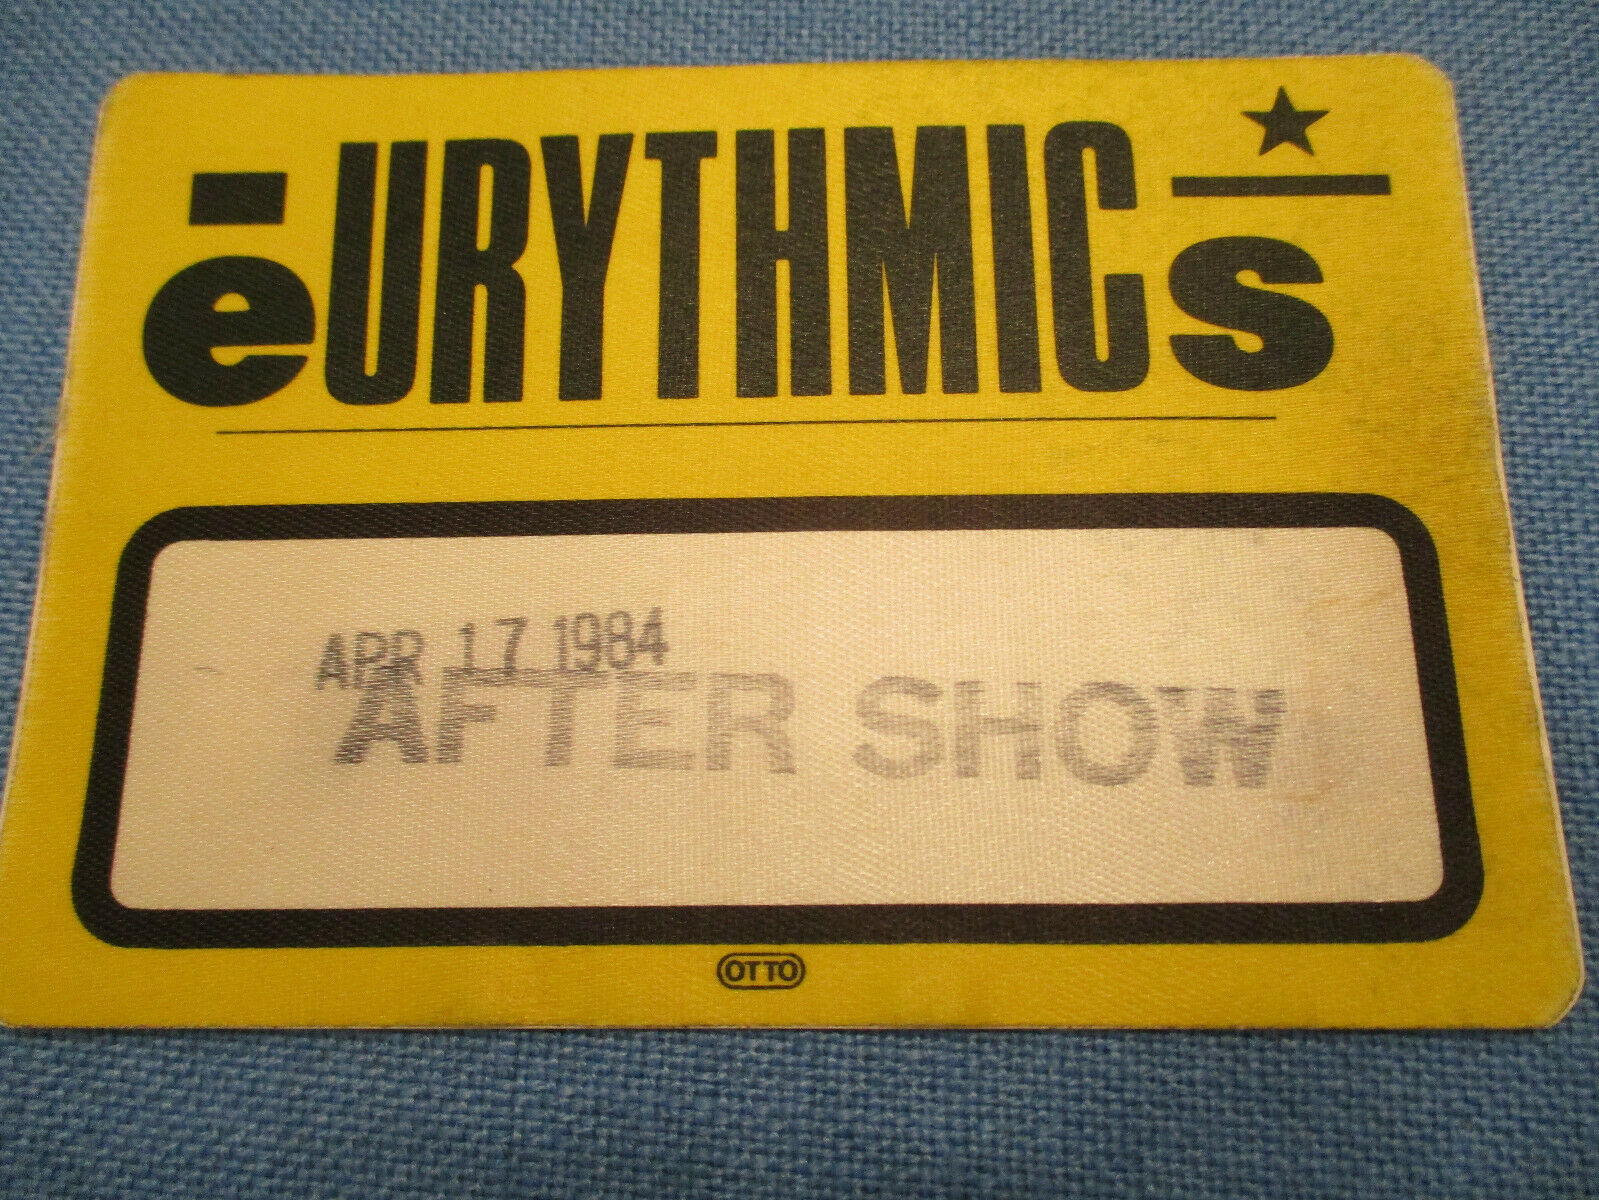 Eurythmics After Show Silk Id Patch, Stamped With The Date Apr 17, 1984